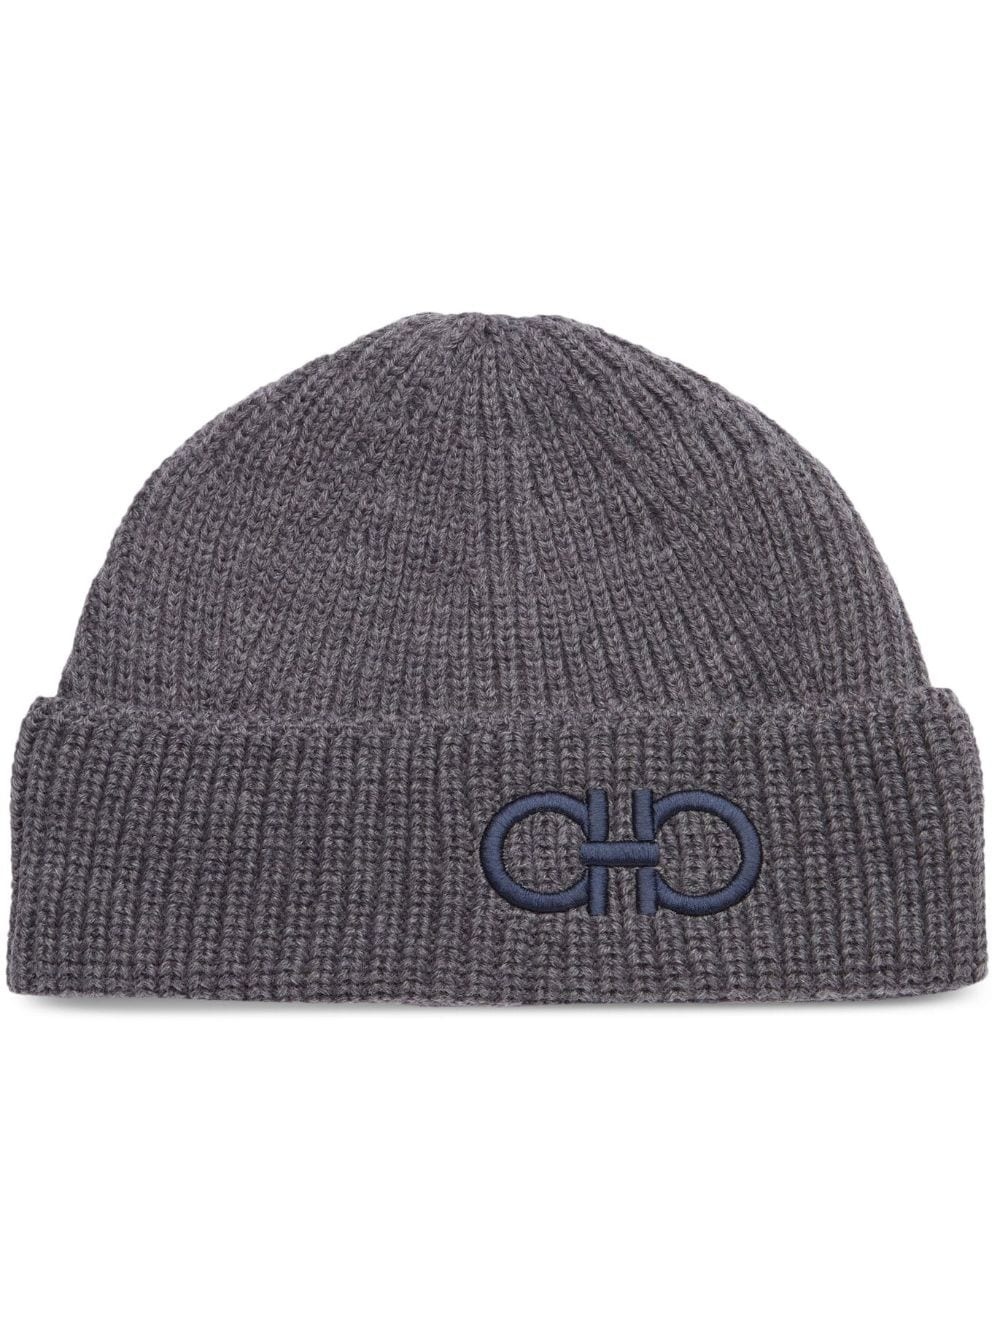 embroidered-logo knit wool beanie - 1